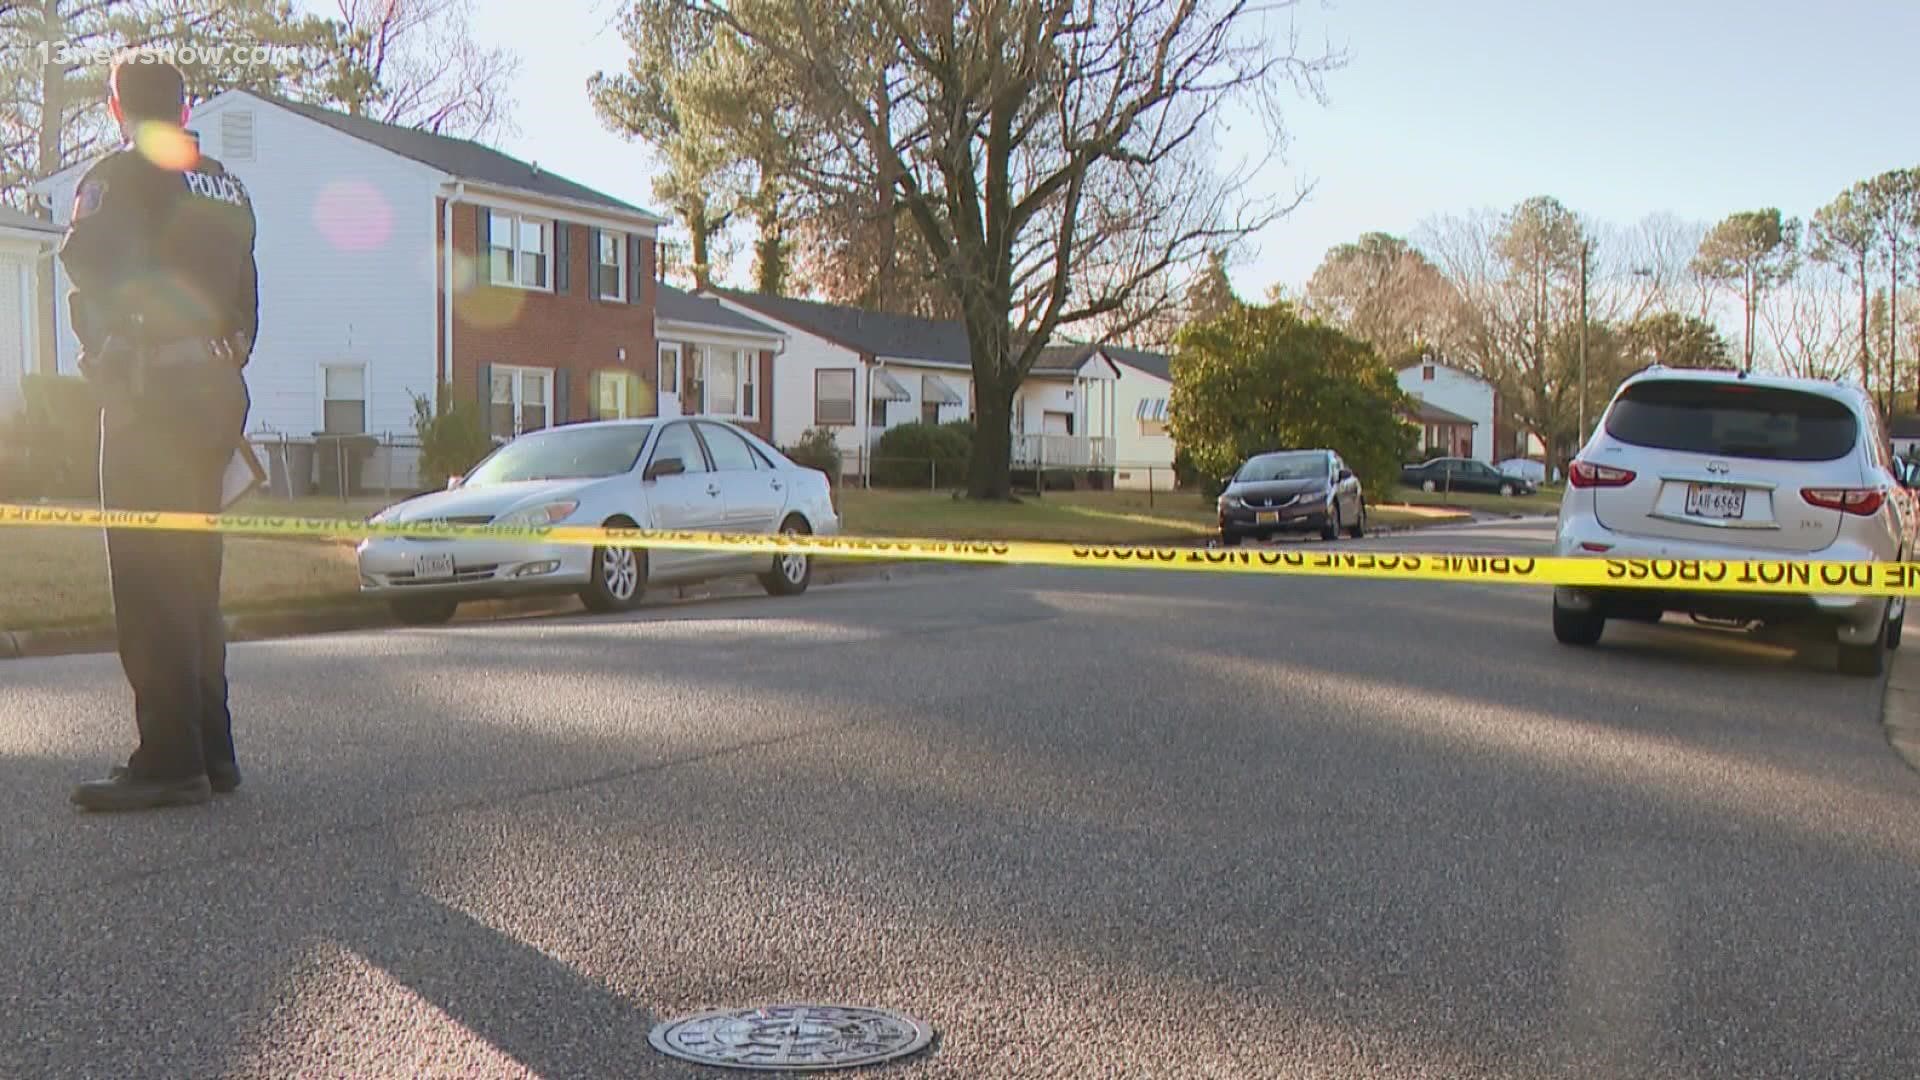 The Hampton Police Division is investigating a shooting that killed a man Thursday morning.